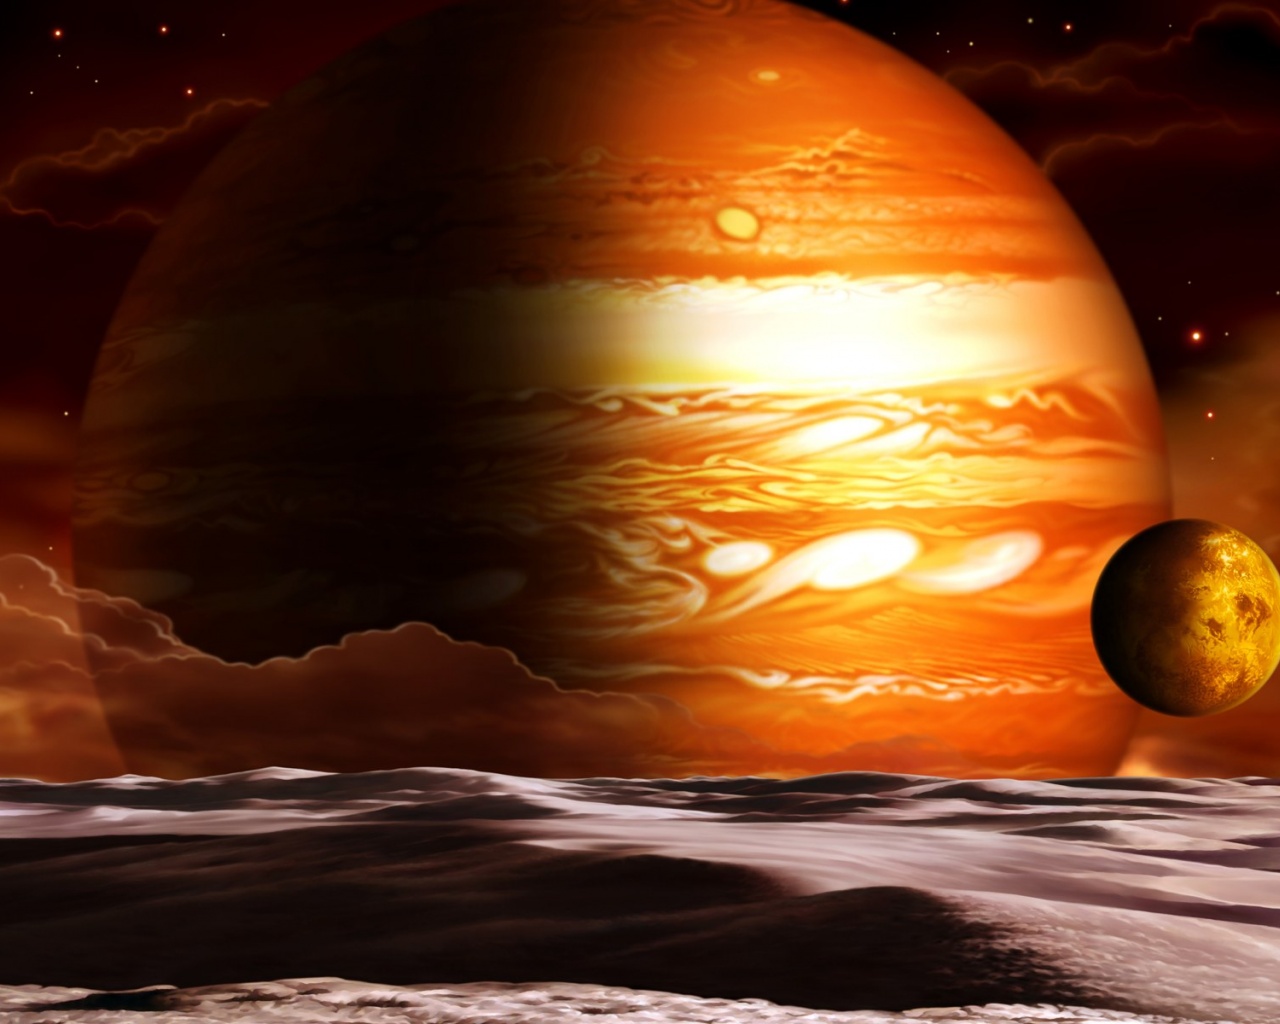 Incredible Galaxy Planets And Spaces Wallpaper 23